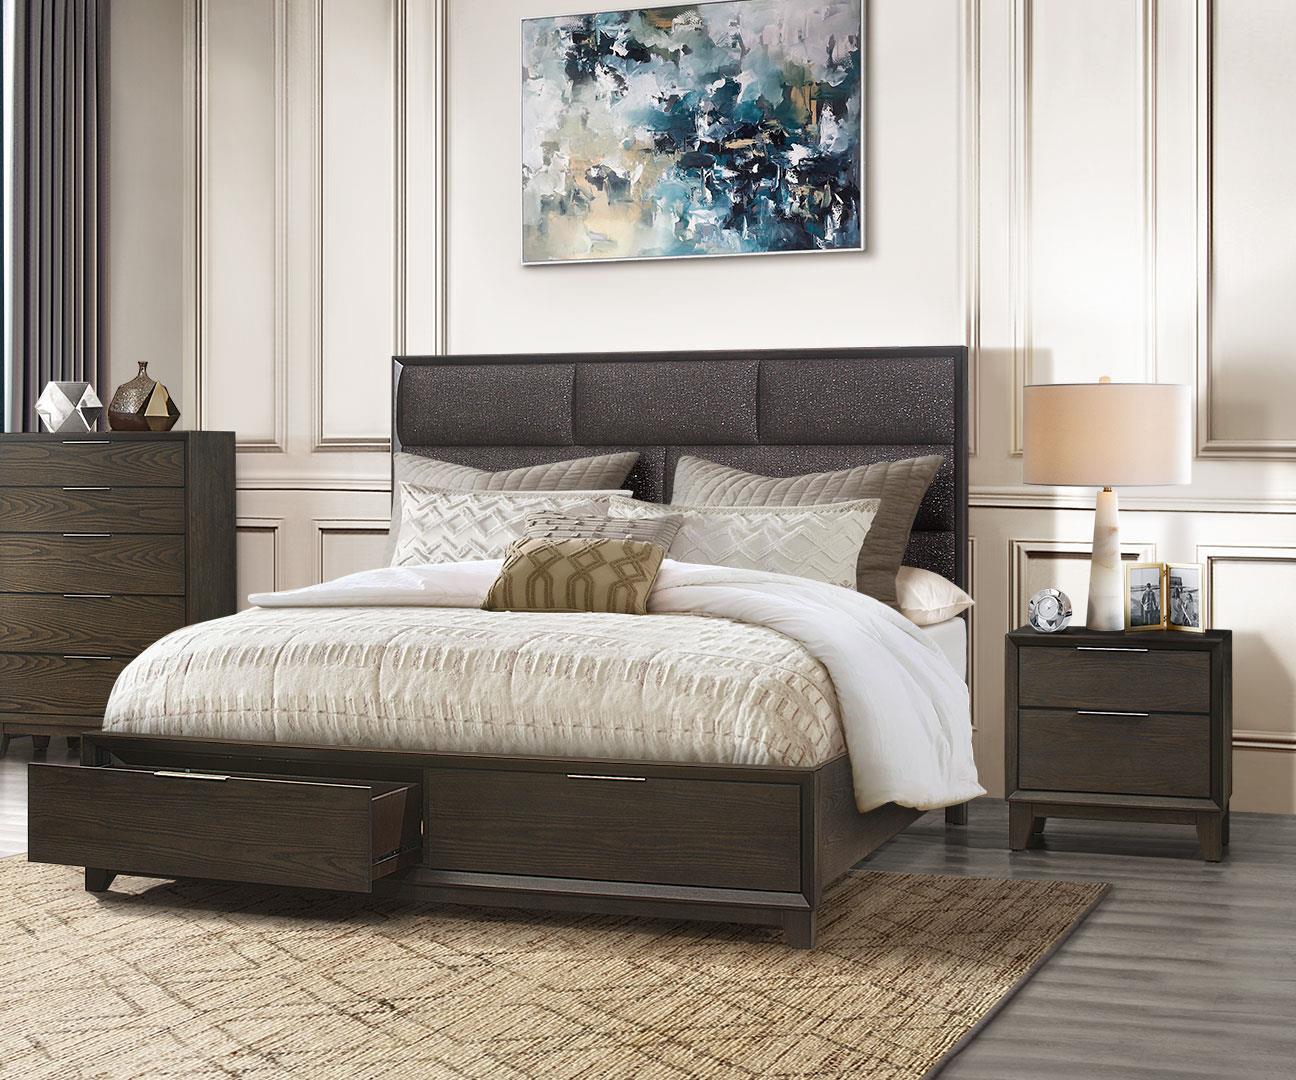 Contemporary Platform Bedroom Set WILLOW WILLOW-QB-Set-3 in Gray, Chocolate Fabric